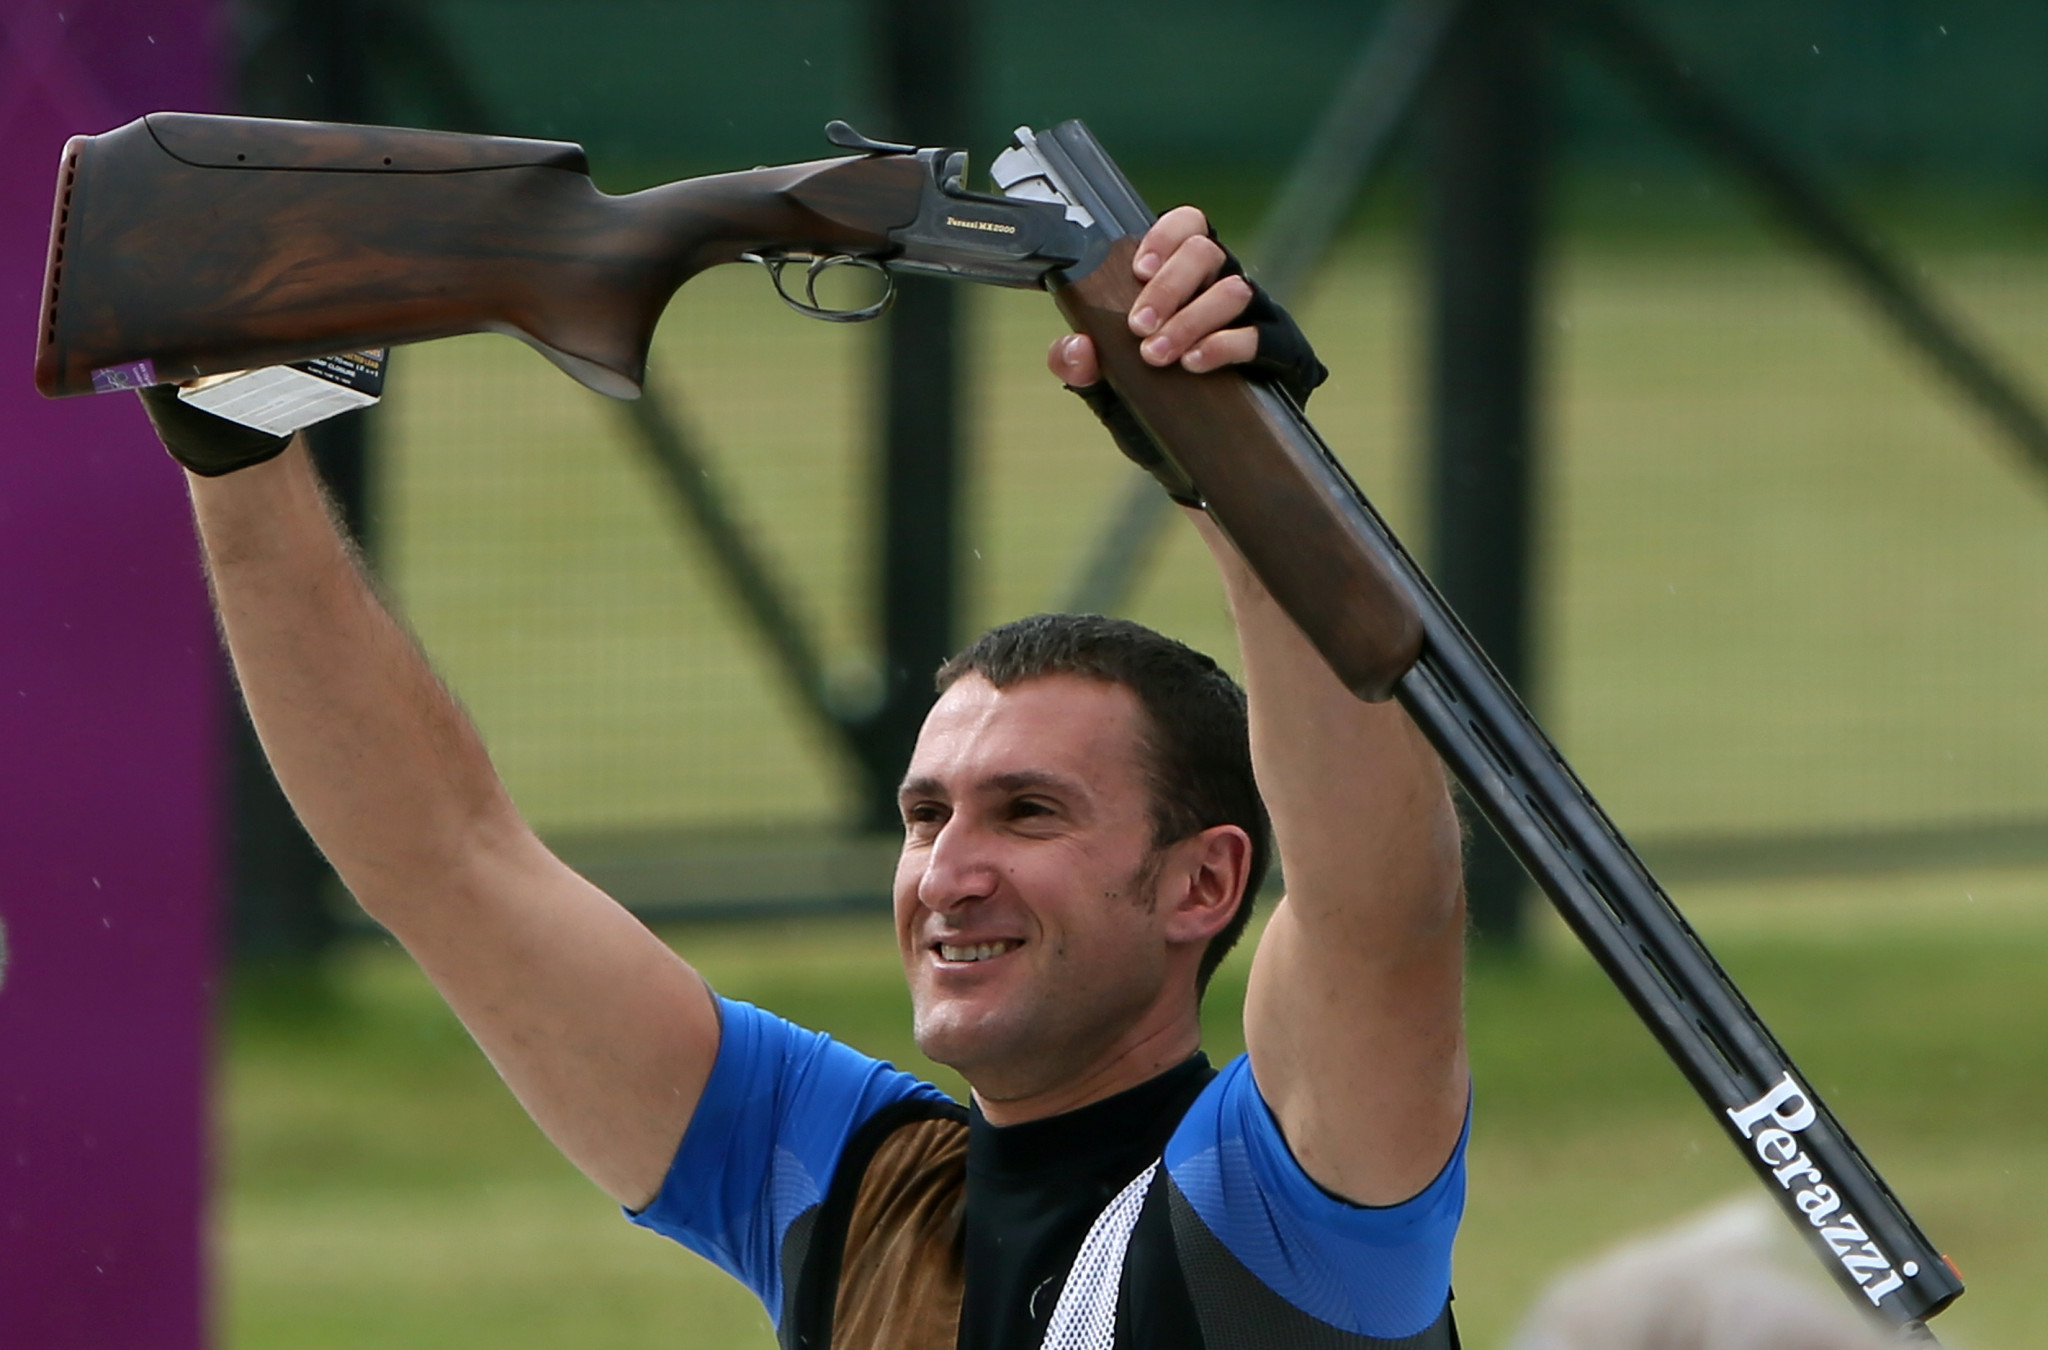 Croatia's Giovanni Cernogoraz came out on top in the men's trap event in Konya ©Getty Images